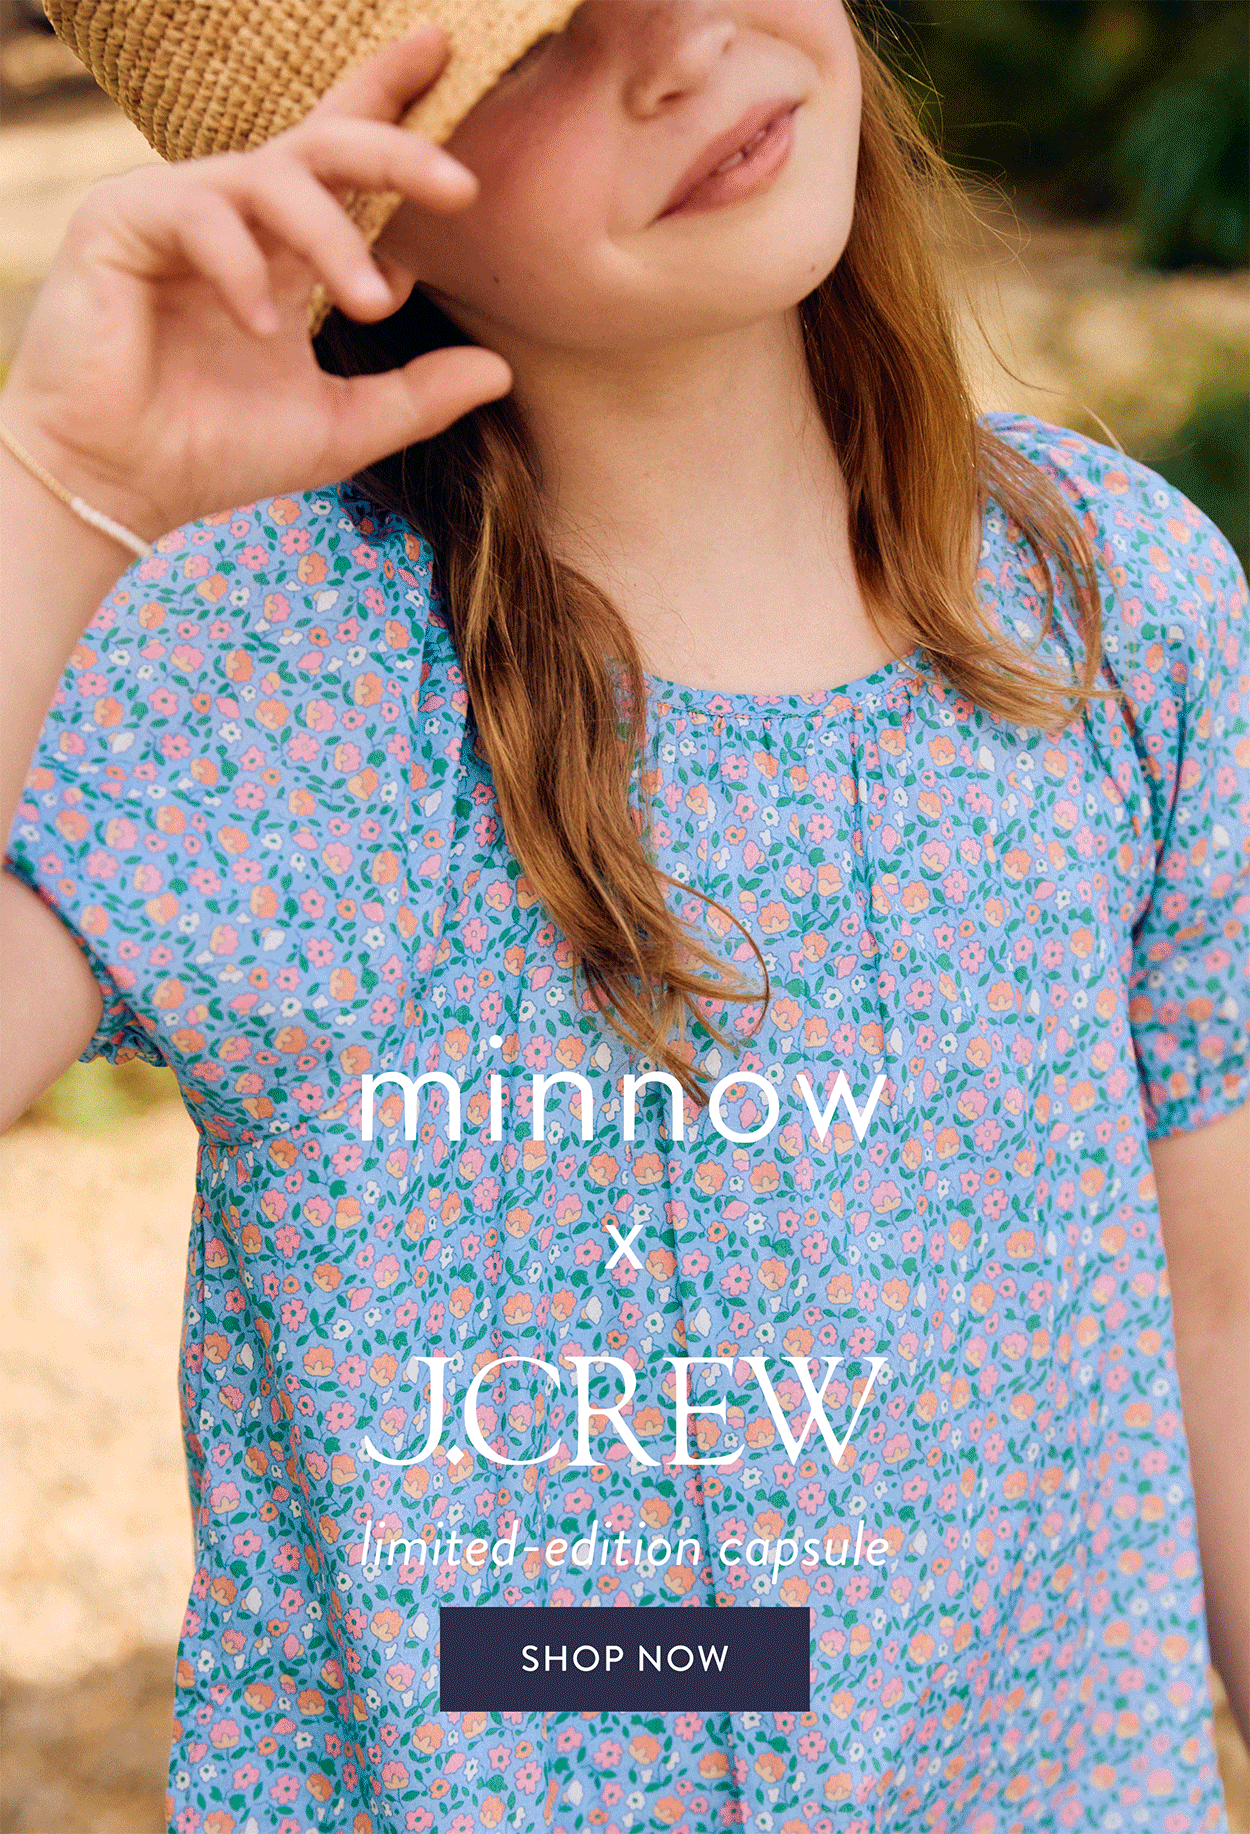 minnow x jcrew gif featuring swim, clothing, and accessories